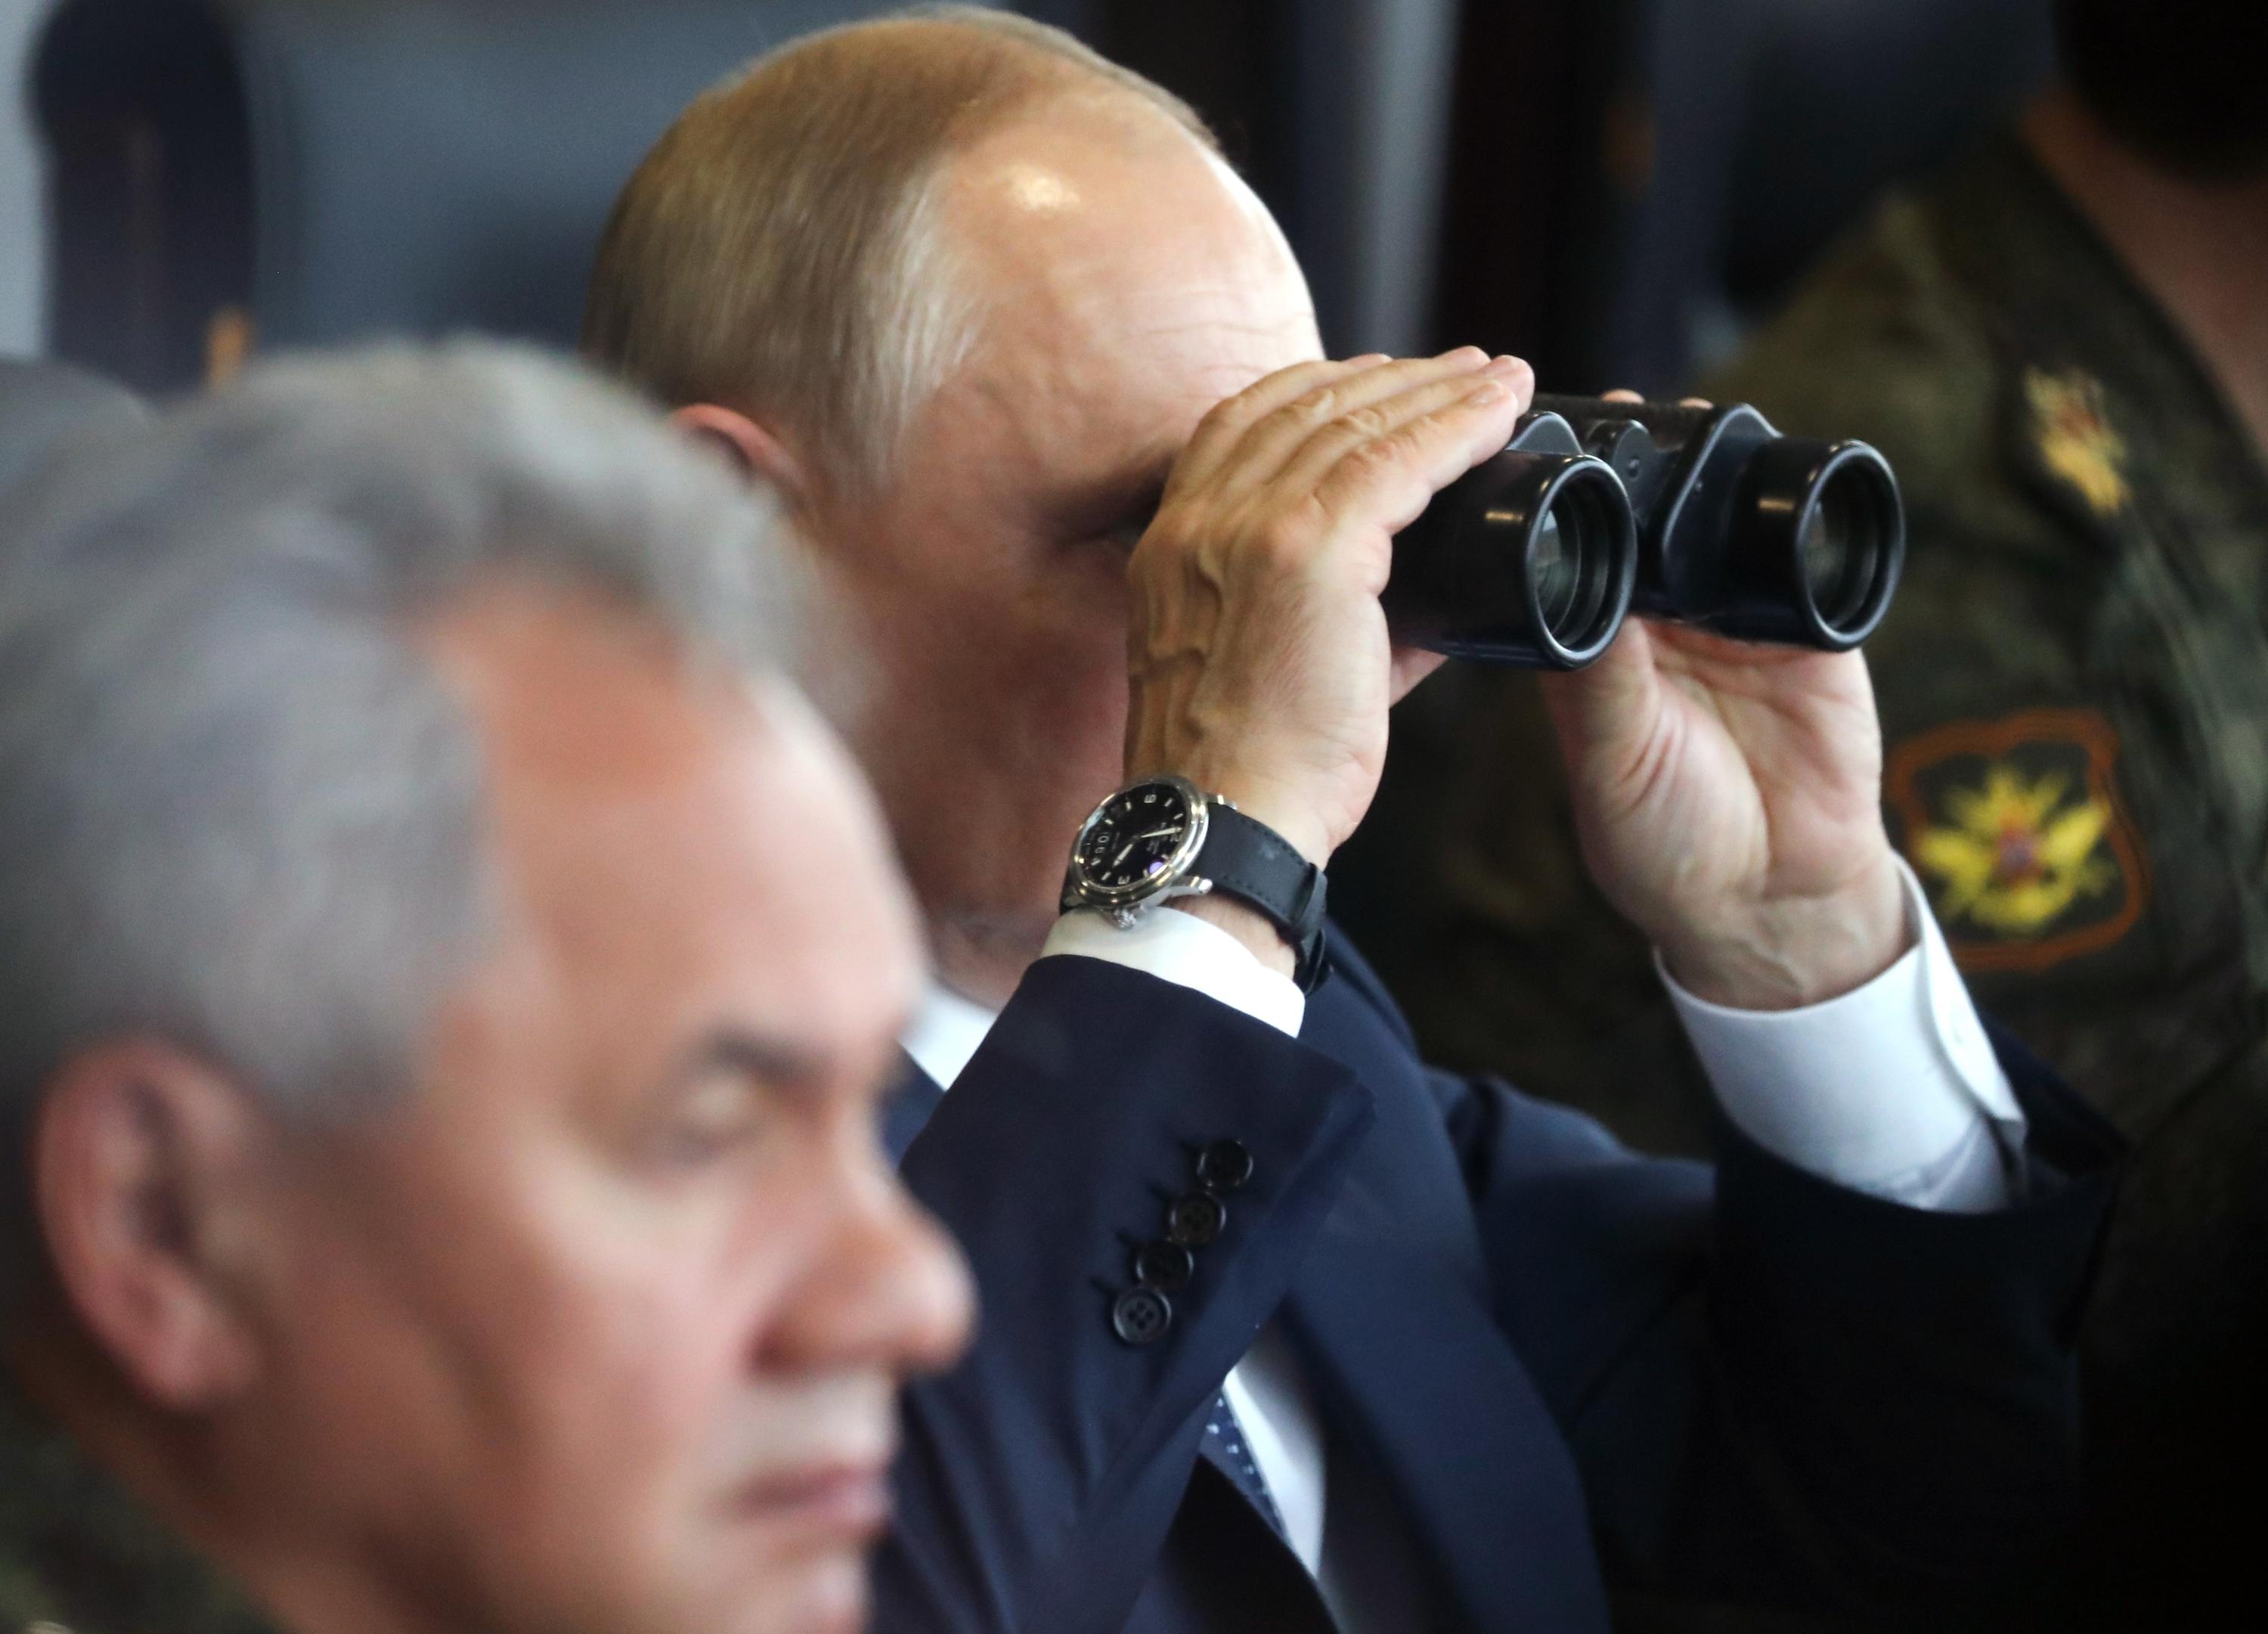 What's Putin thinking? Tough to know for nuclear analysts - The Associated Press